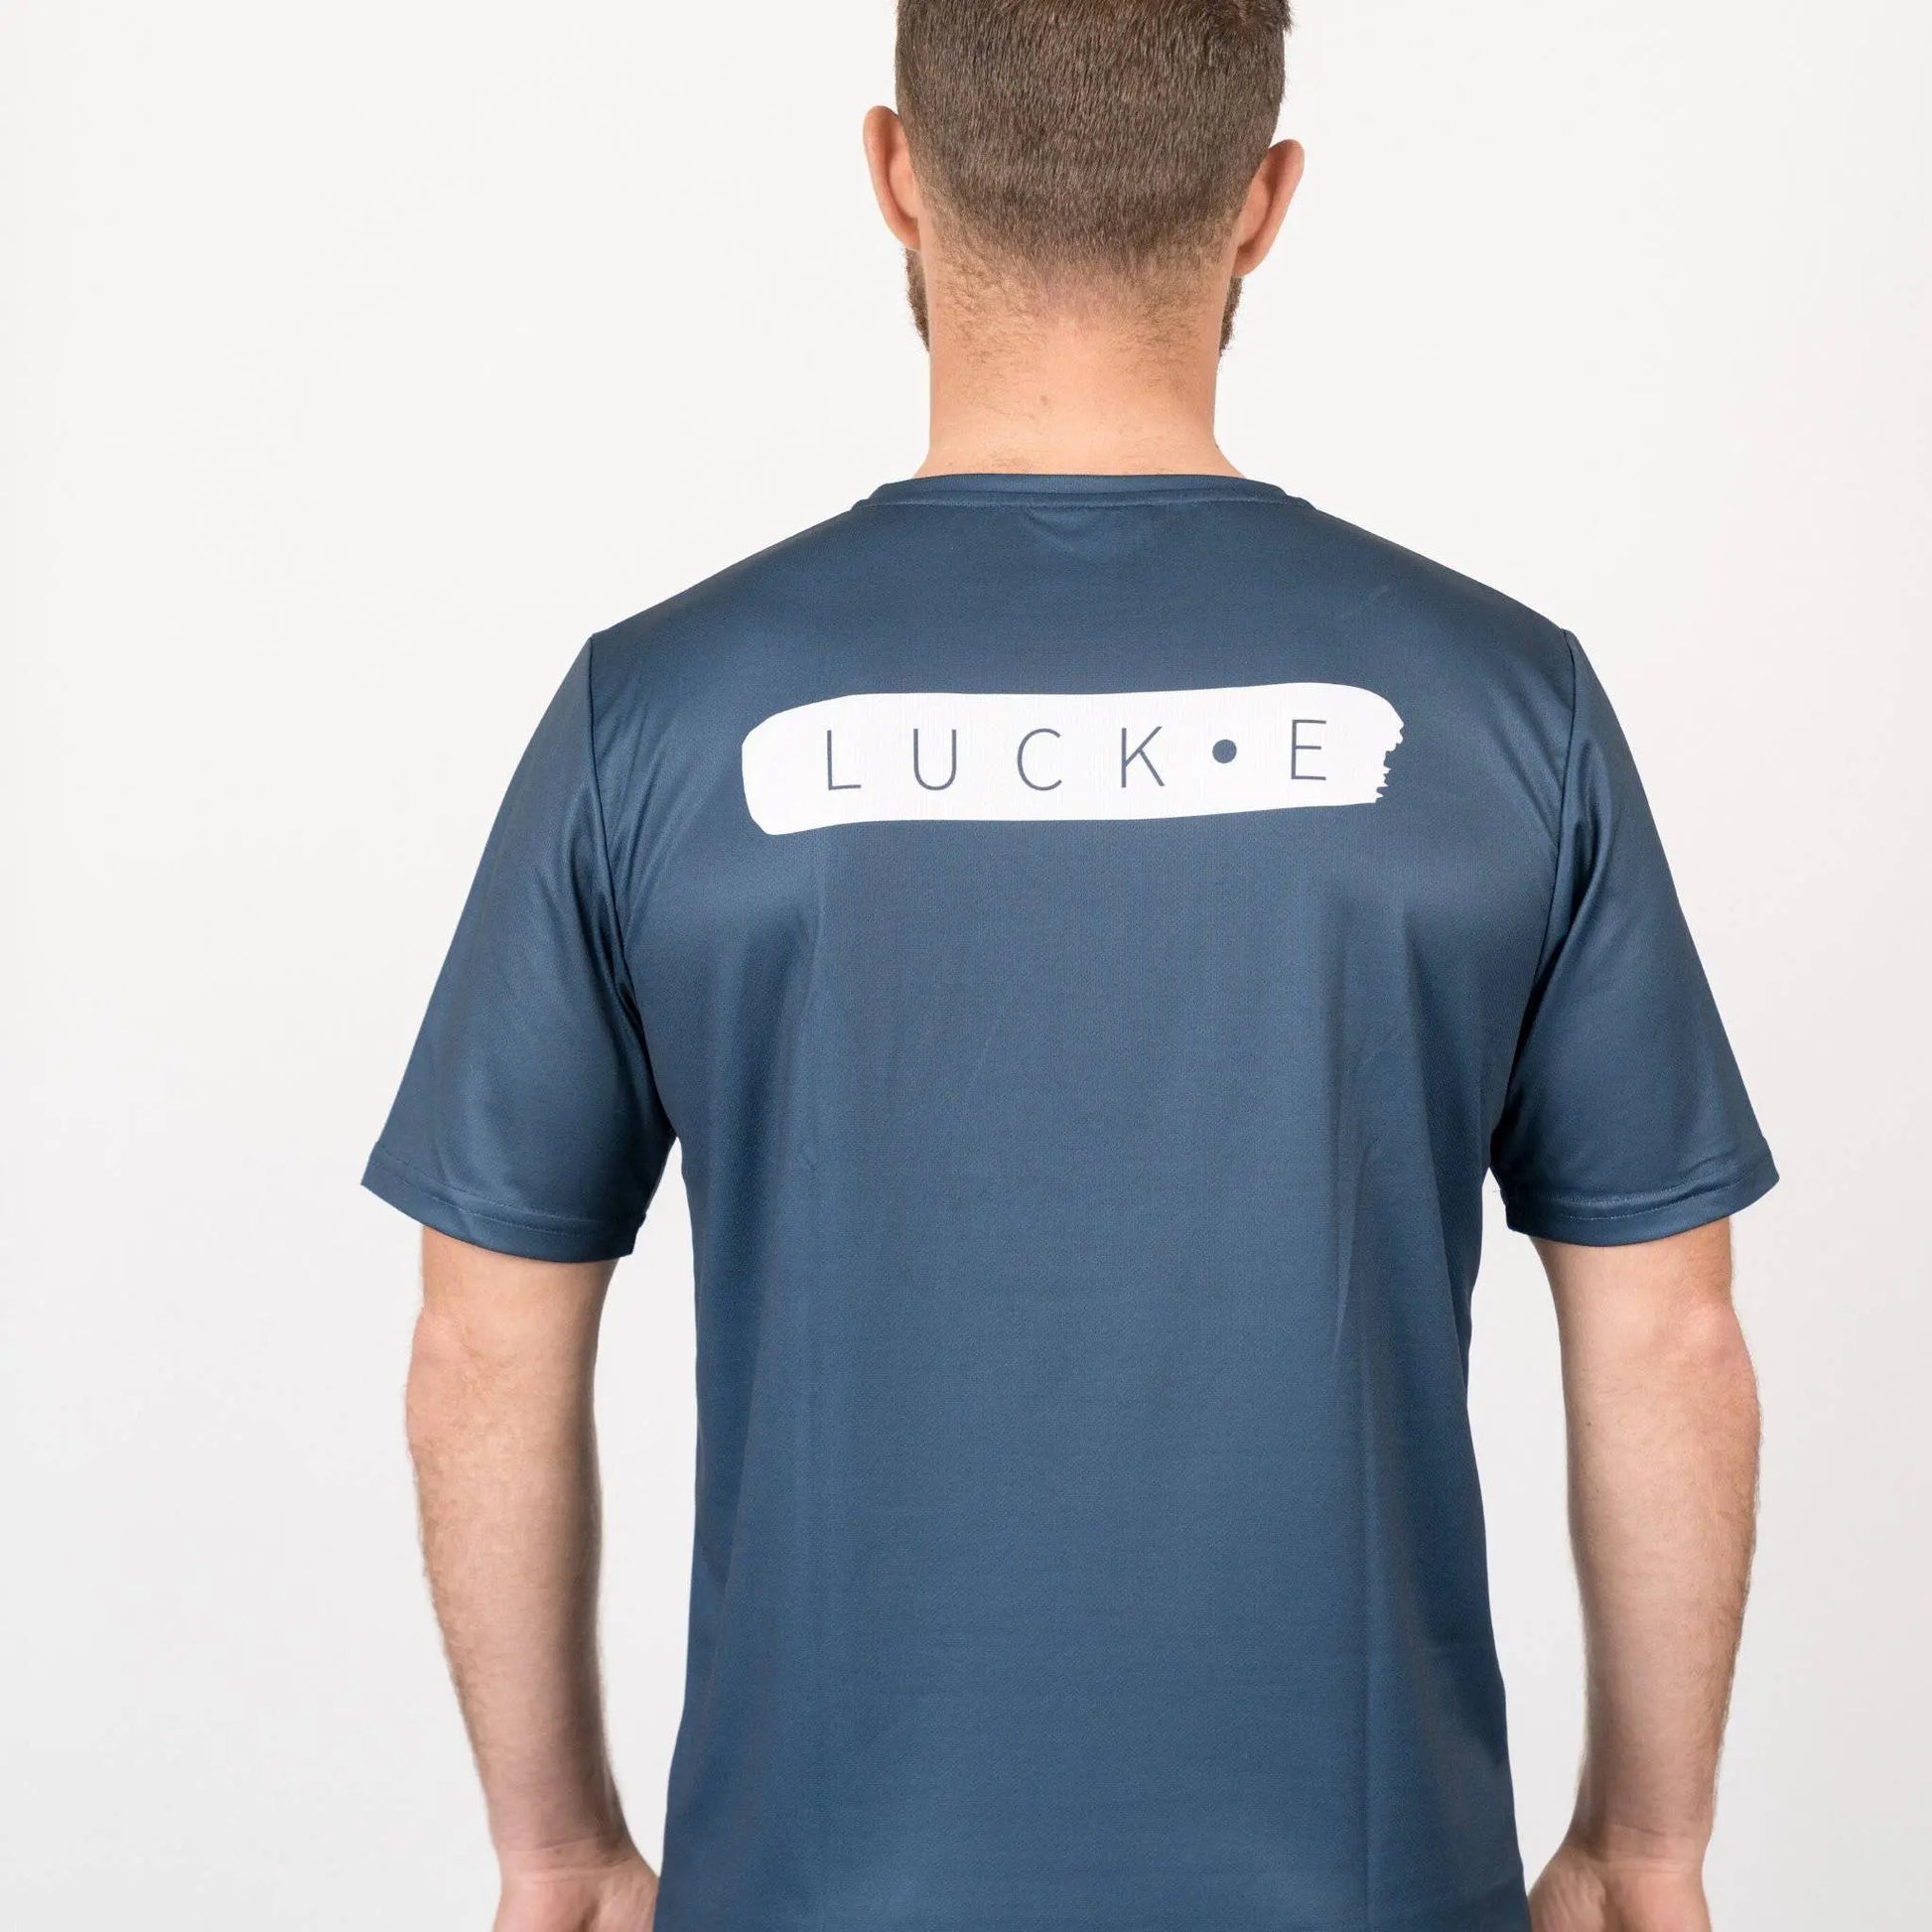 Men's Performance Tech Tee | Made From 100% Recycled Ocean Waste LUCKE NZ